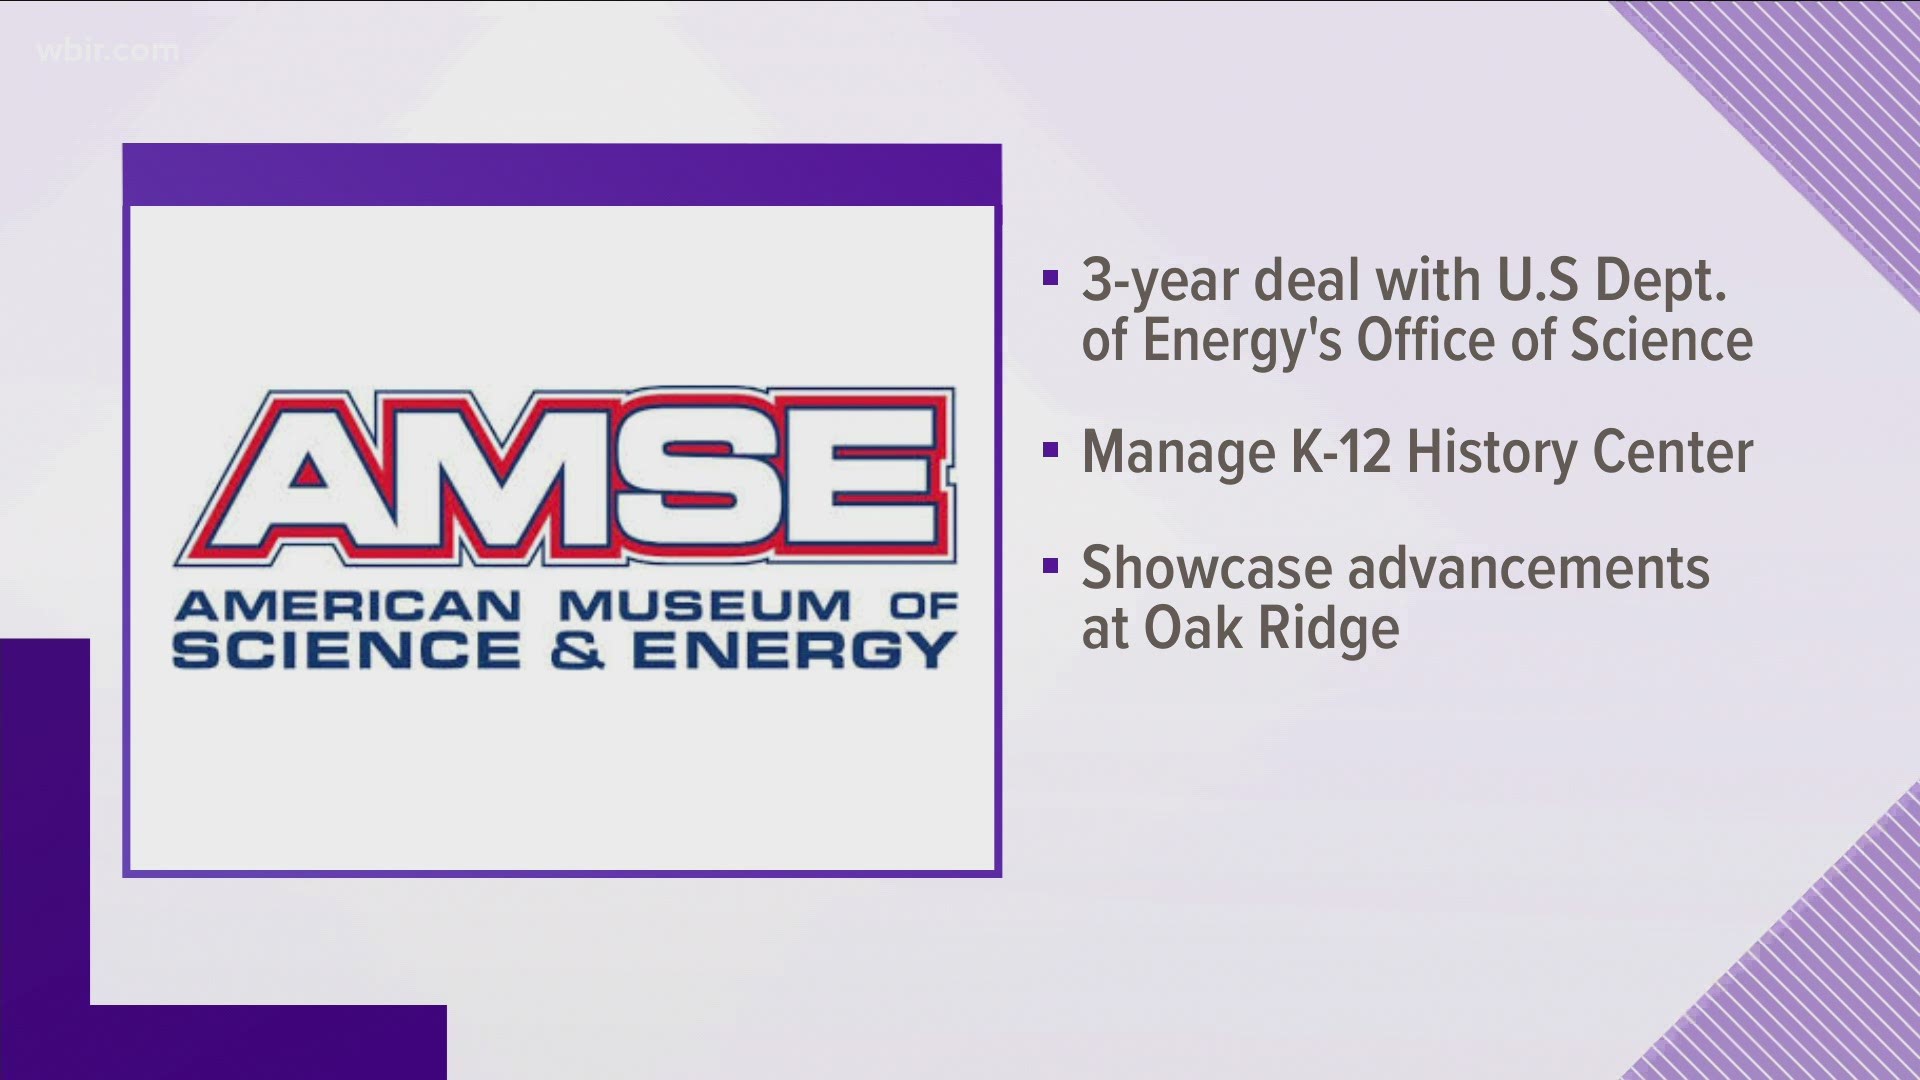 The American Museum of Science and Energy is now in charge of showcasing the history of Oak Ridge.